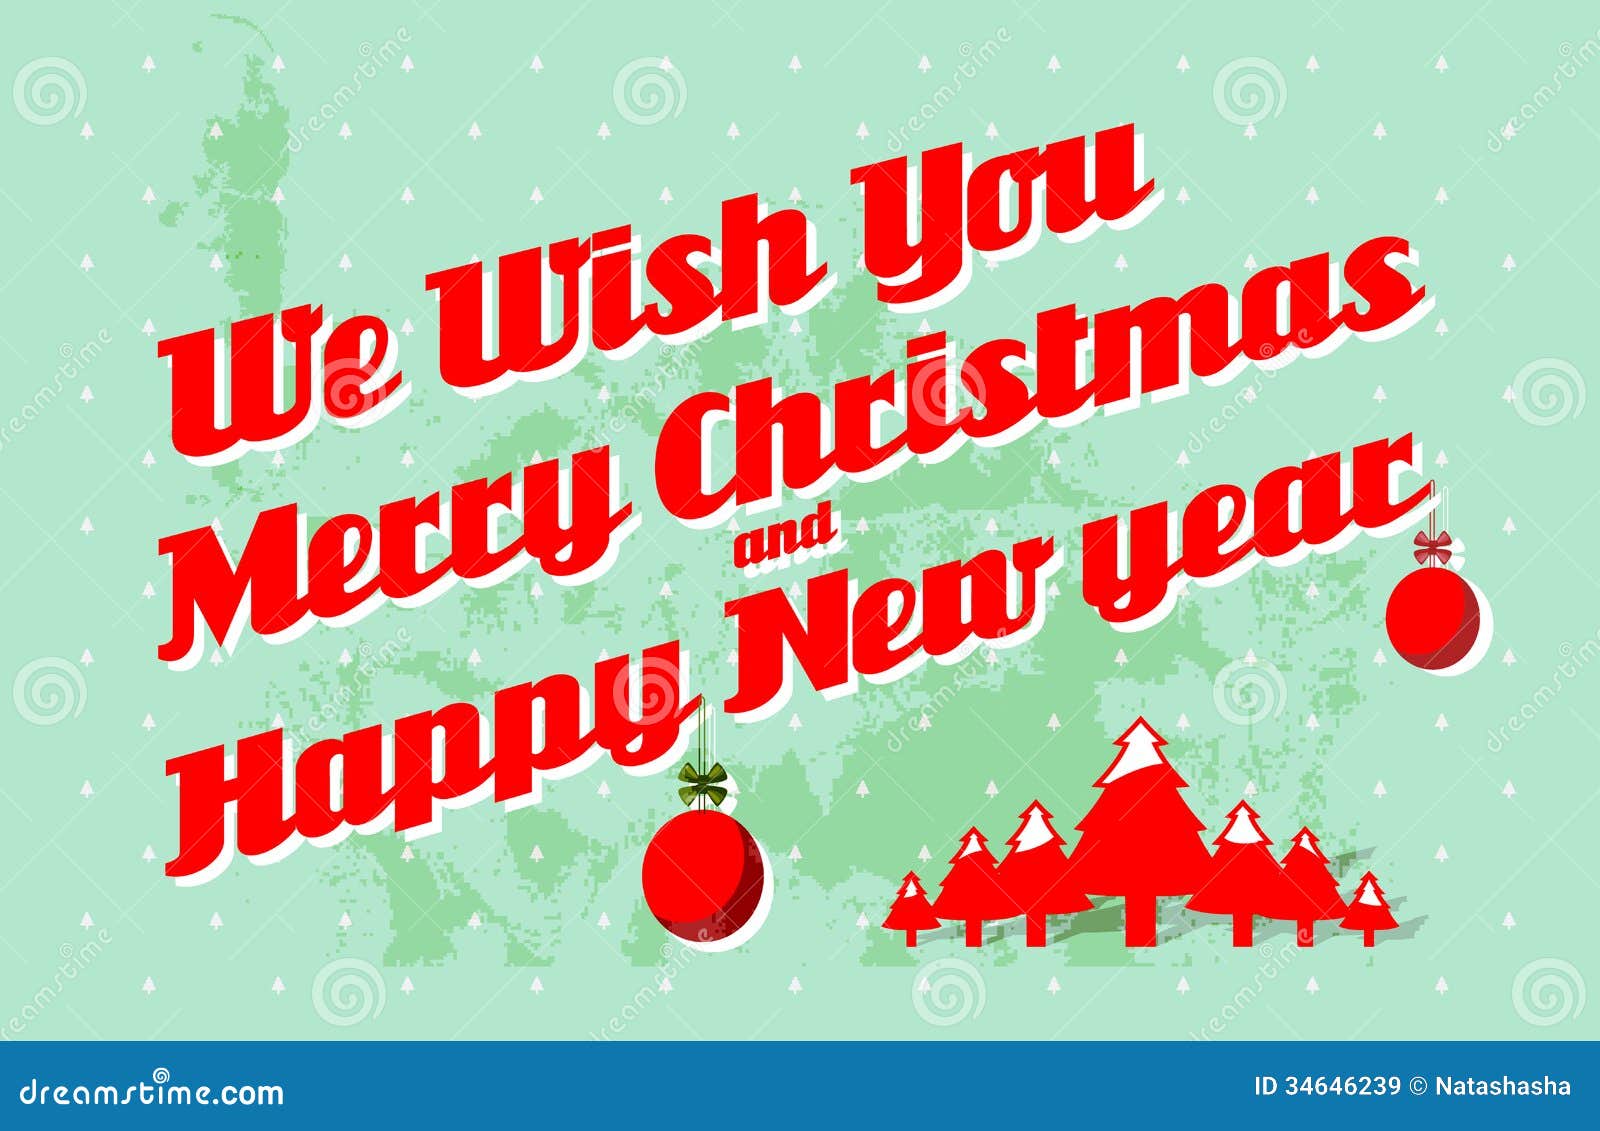 clipart merry christmas happy new year - photo #36